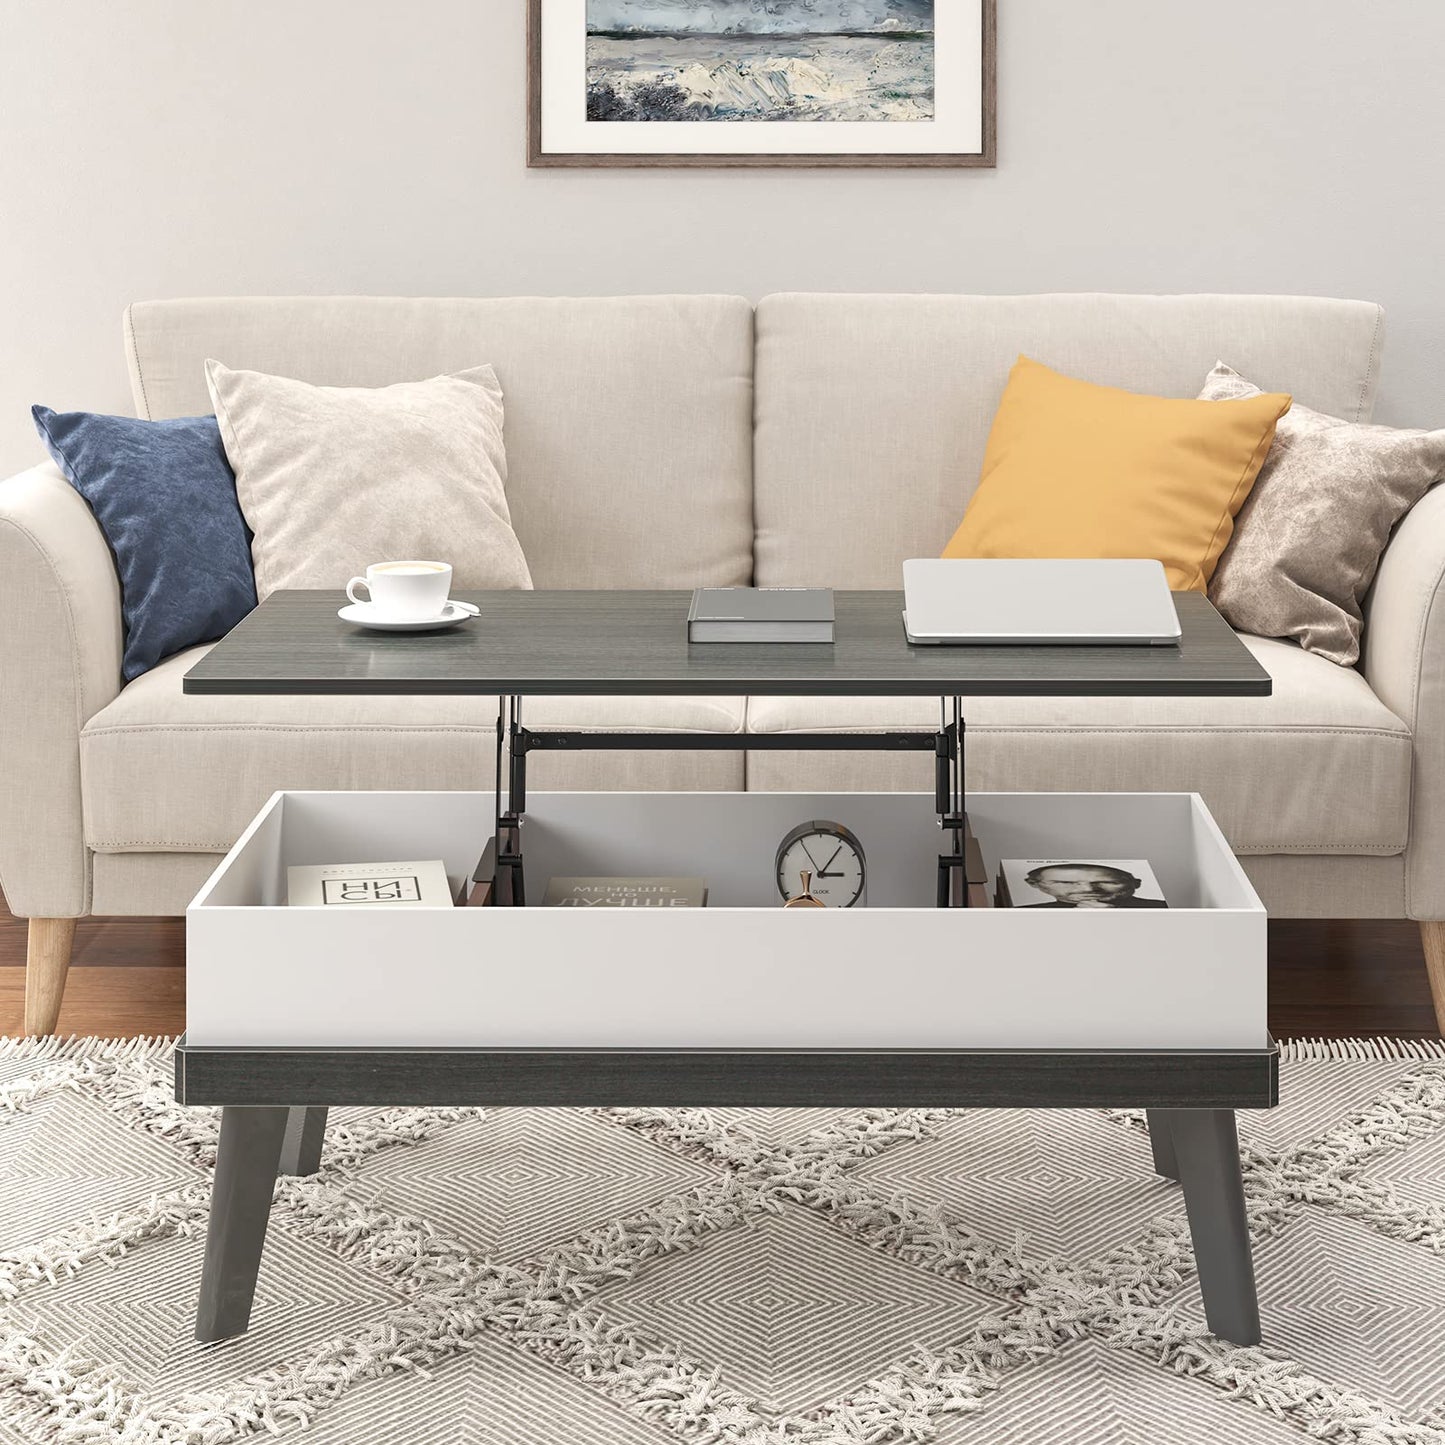 SogesHome Lift Top Coffee Table, Tea Table with Hidden Compartment, Lift Tabletop Table for Living Room, Home Office, Kitchen, Grey&White